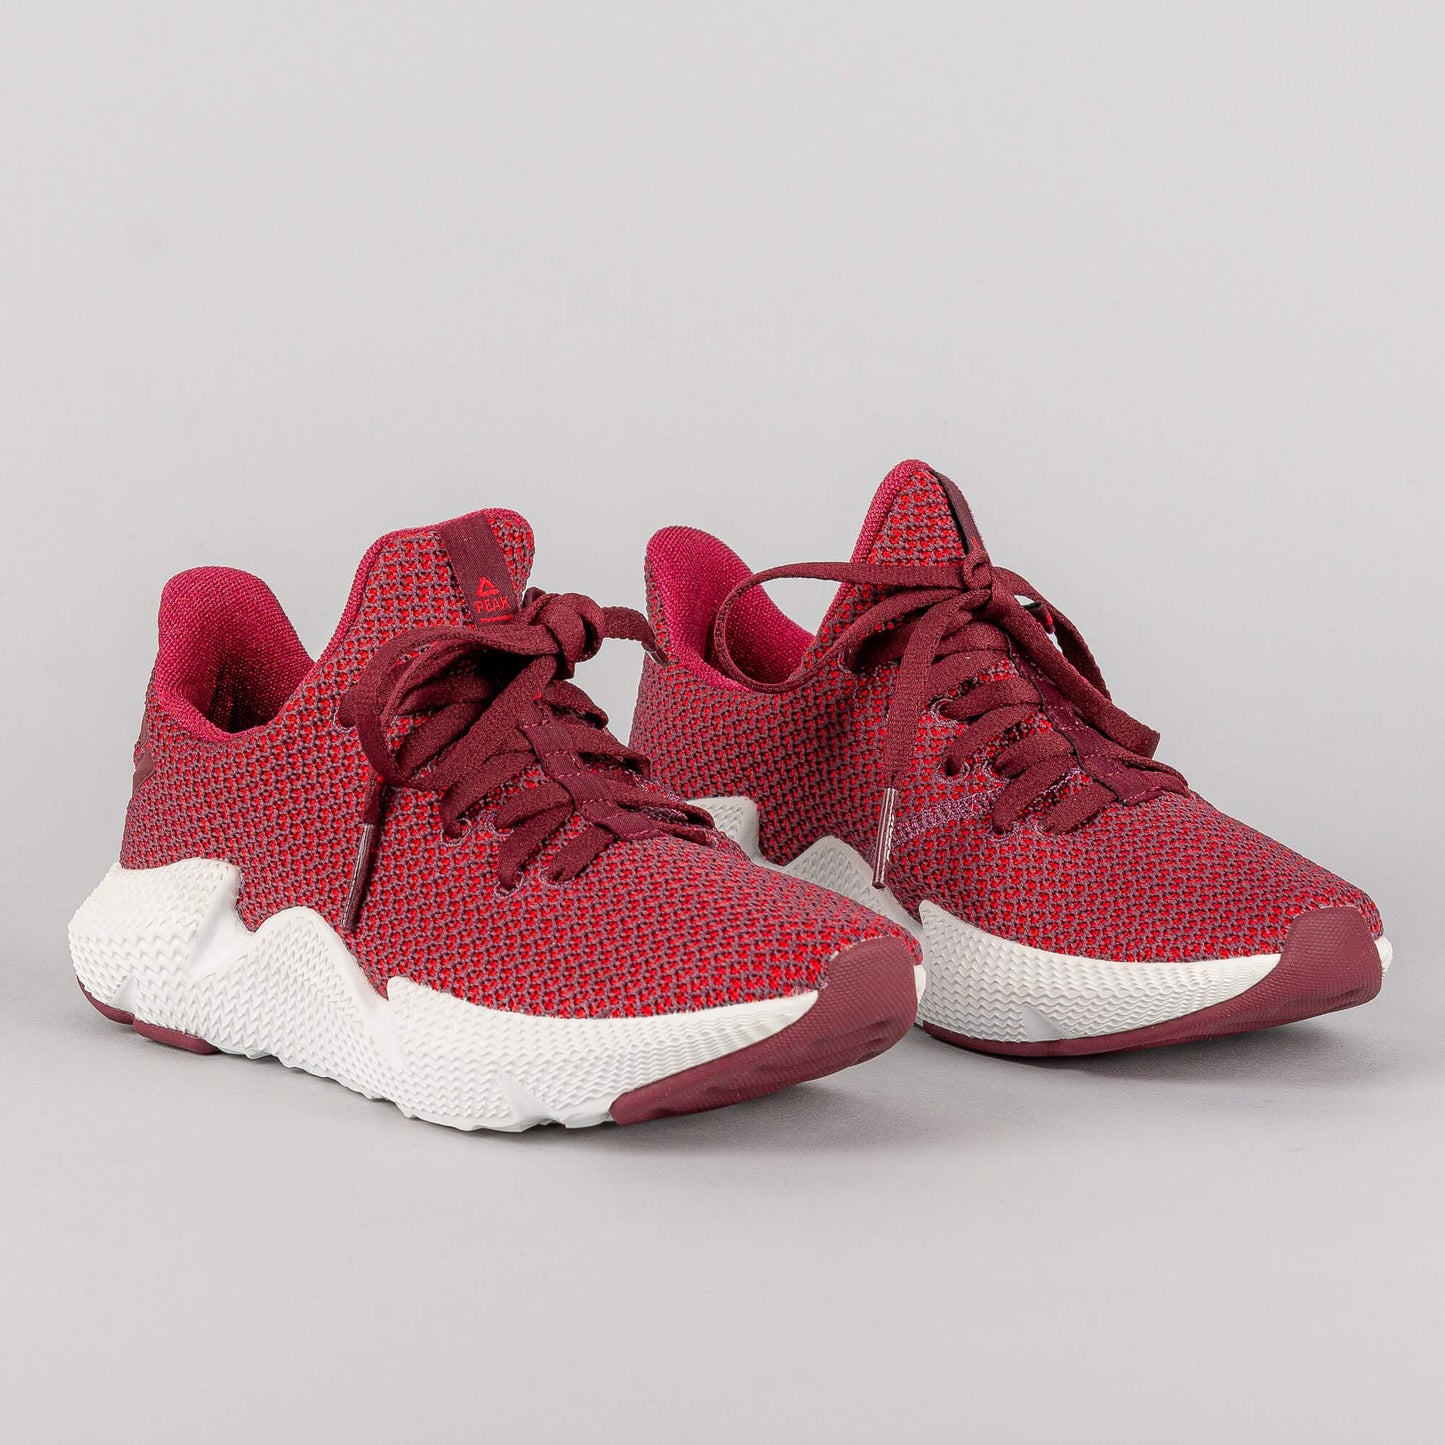 Peak Basketball Culture Shoes Sports Red